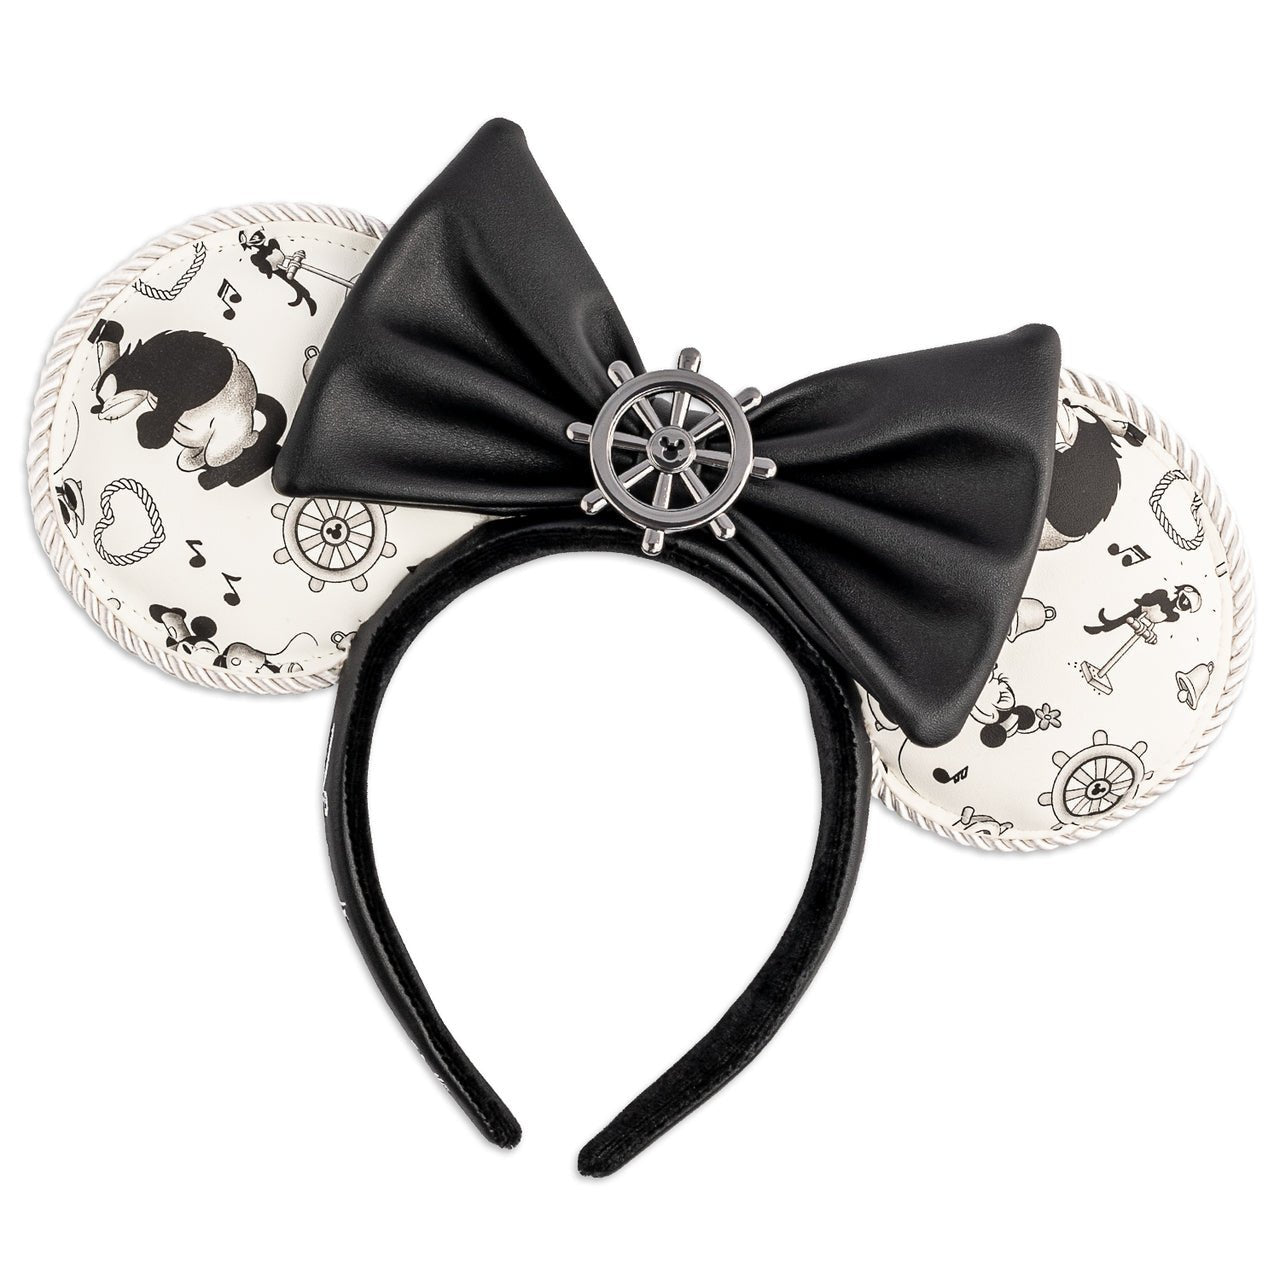 Loungefly x Disney Steamboat Willie Bow Headband - GeekCore